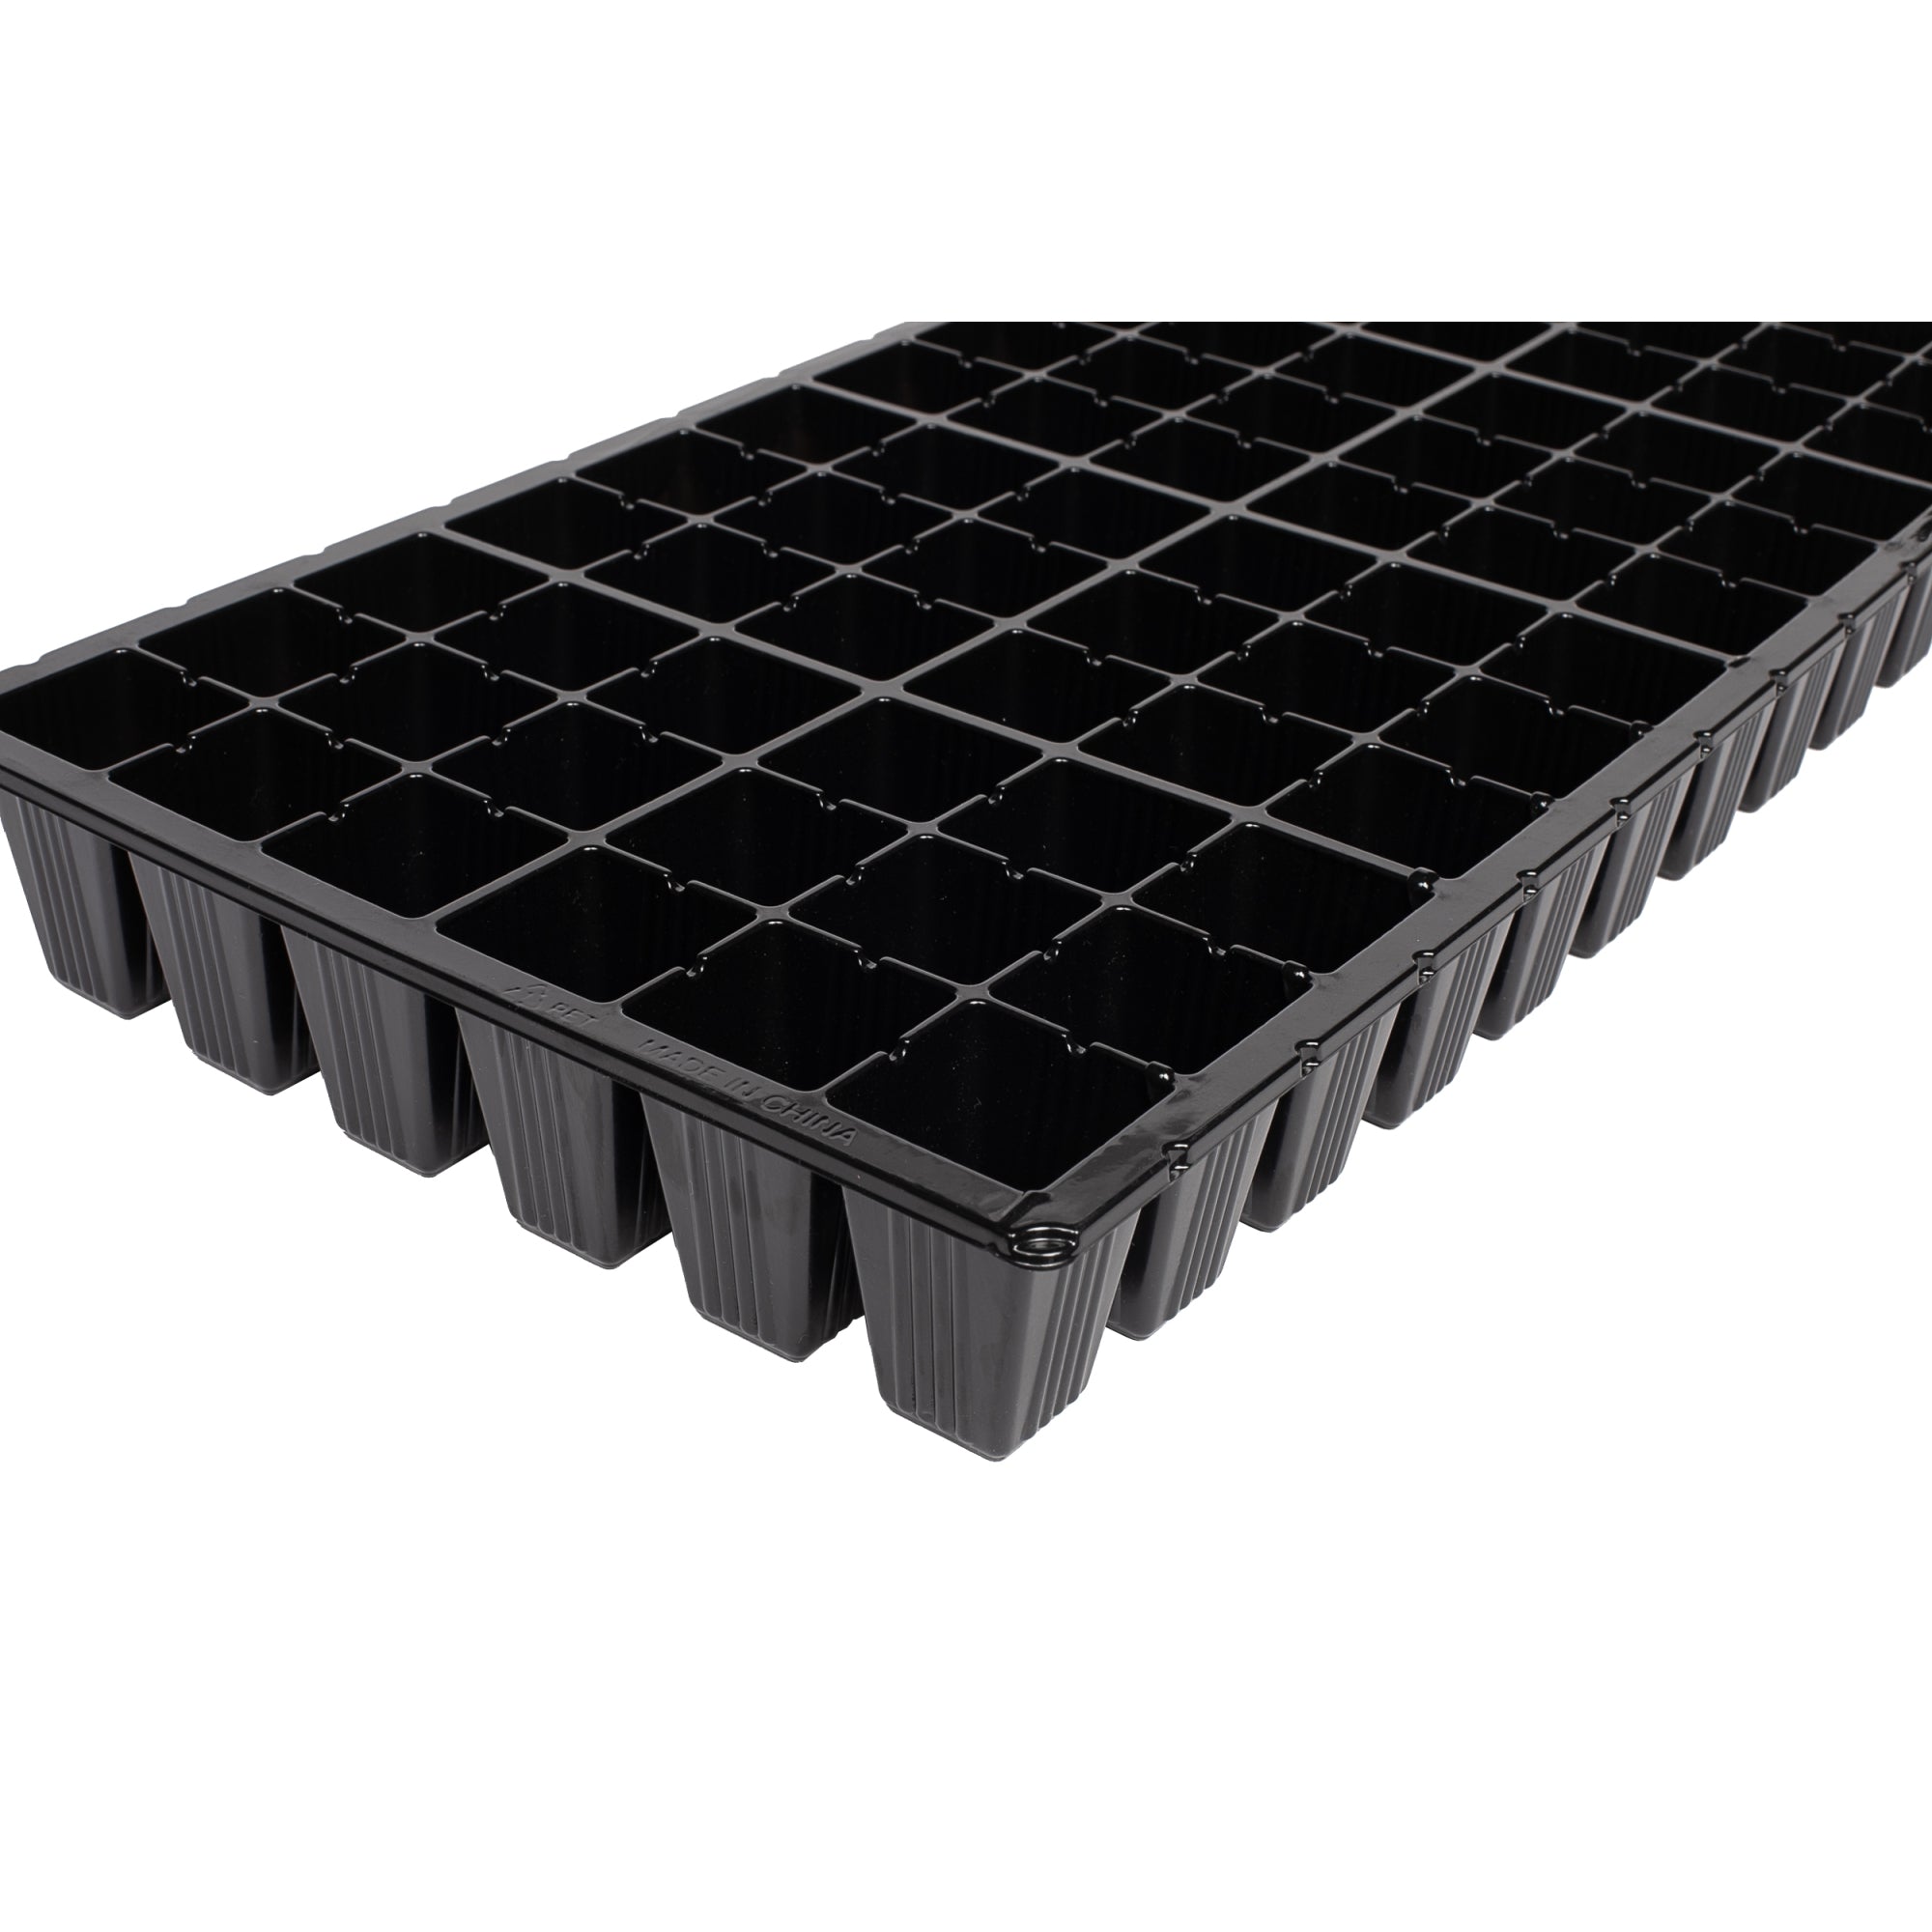 Sunpack 21"x11" 72-Cell Extra Strength Square Insert, for Greenhouses, Gardening, and Seedlings, Black, Fits 10"x20" Trays